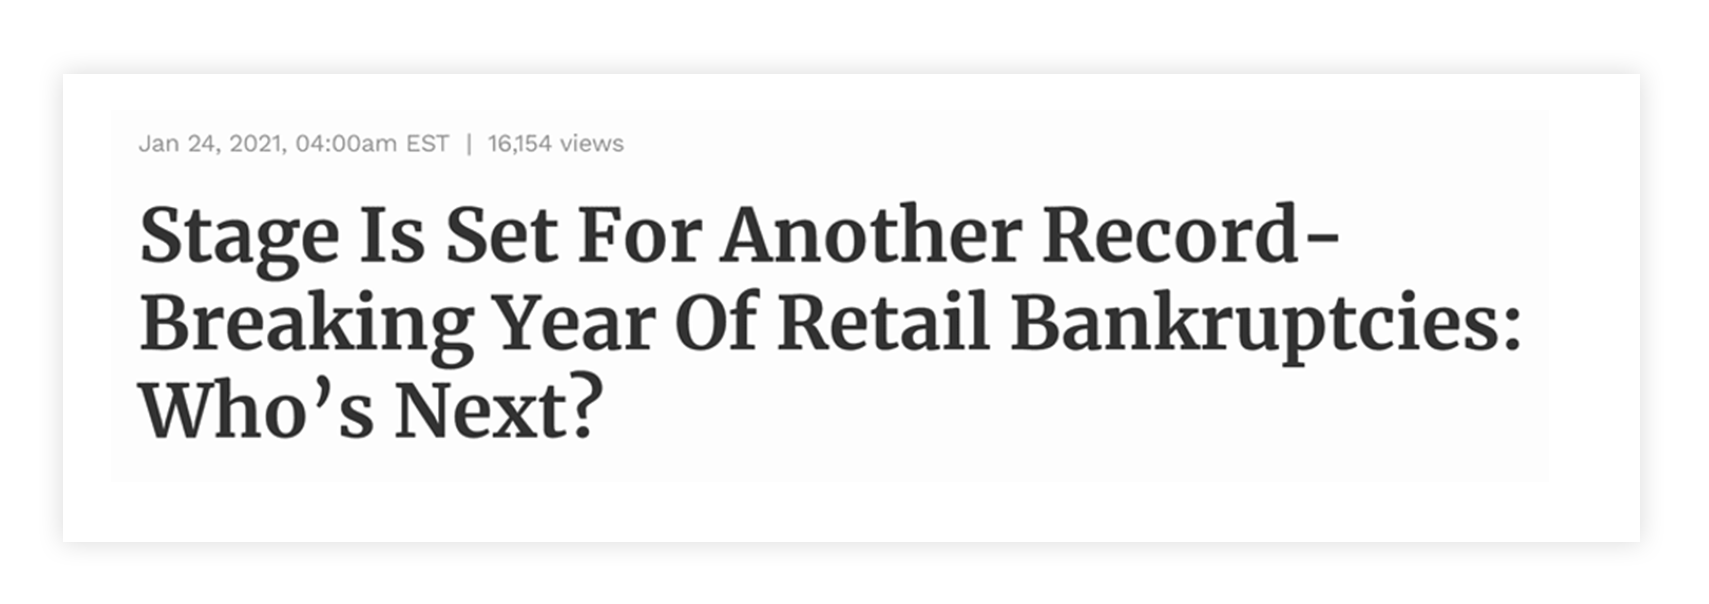 Stage is Set for Another Record-Breaking Year of Retail Bankruptcies: Who’s Next?